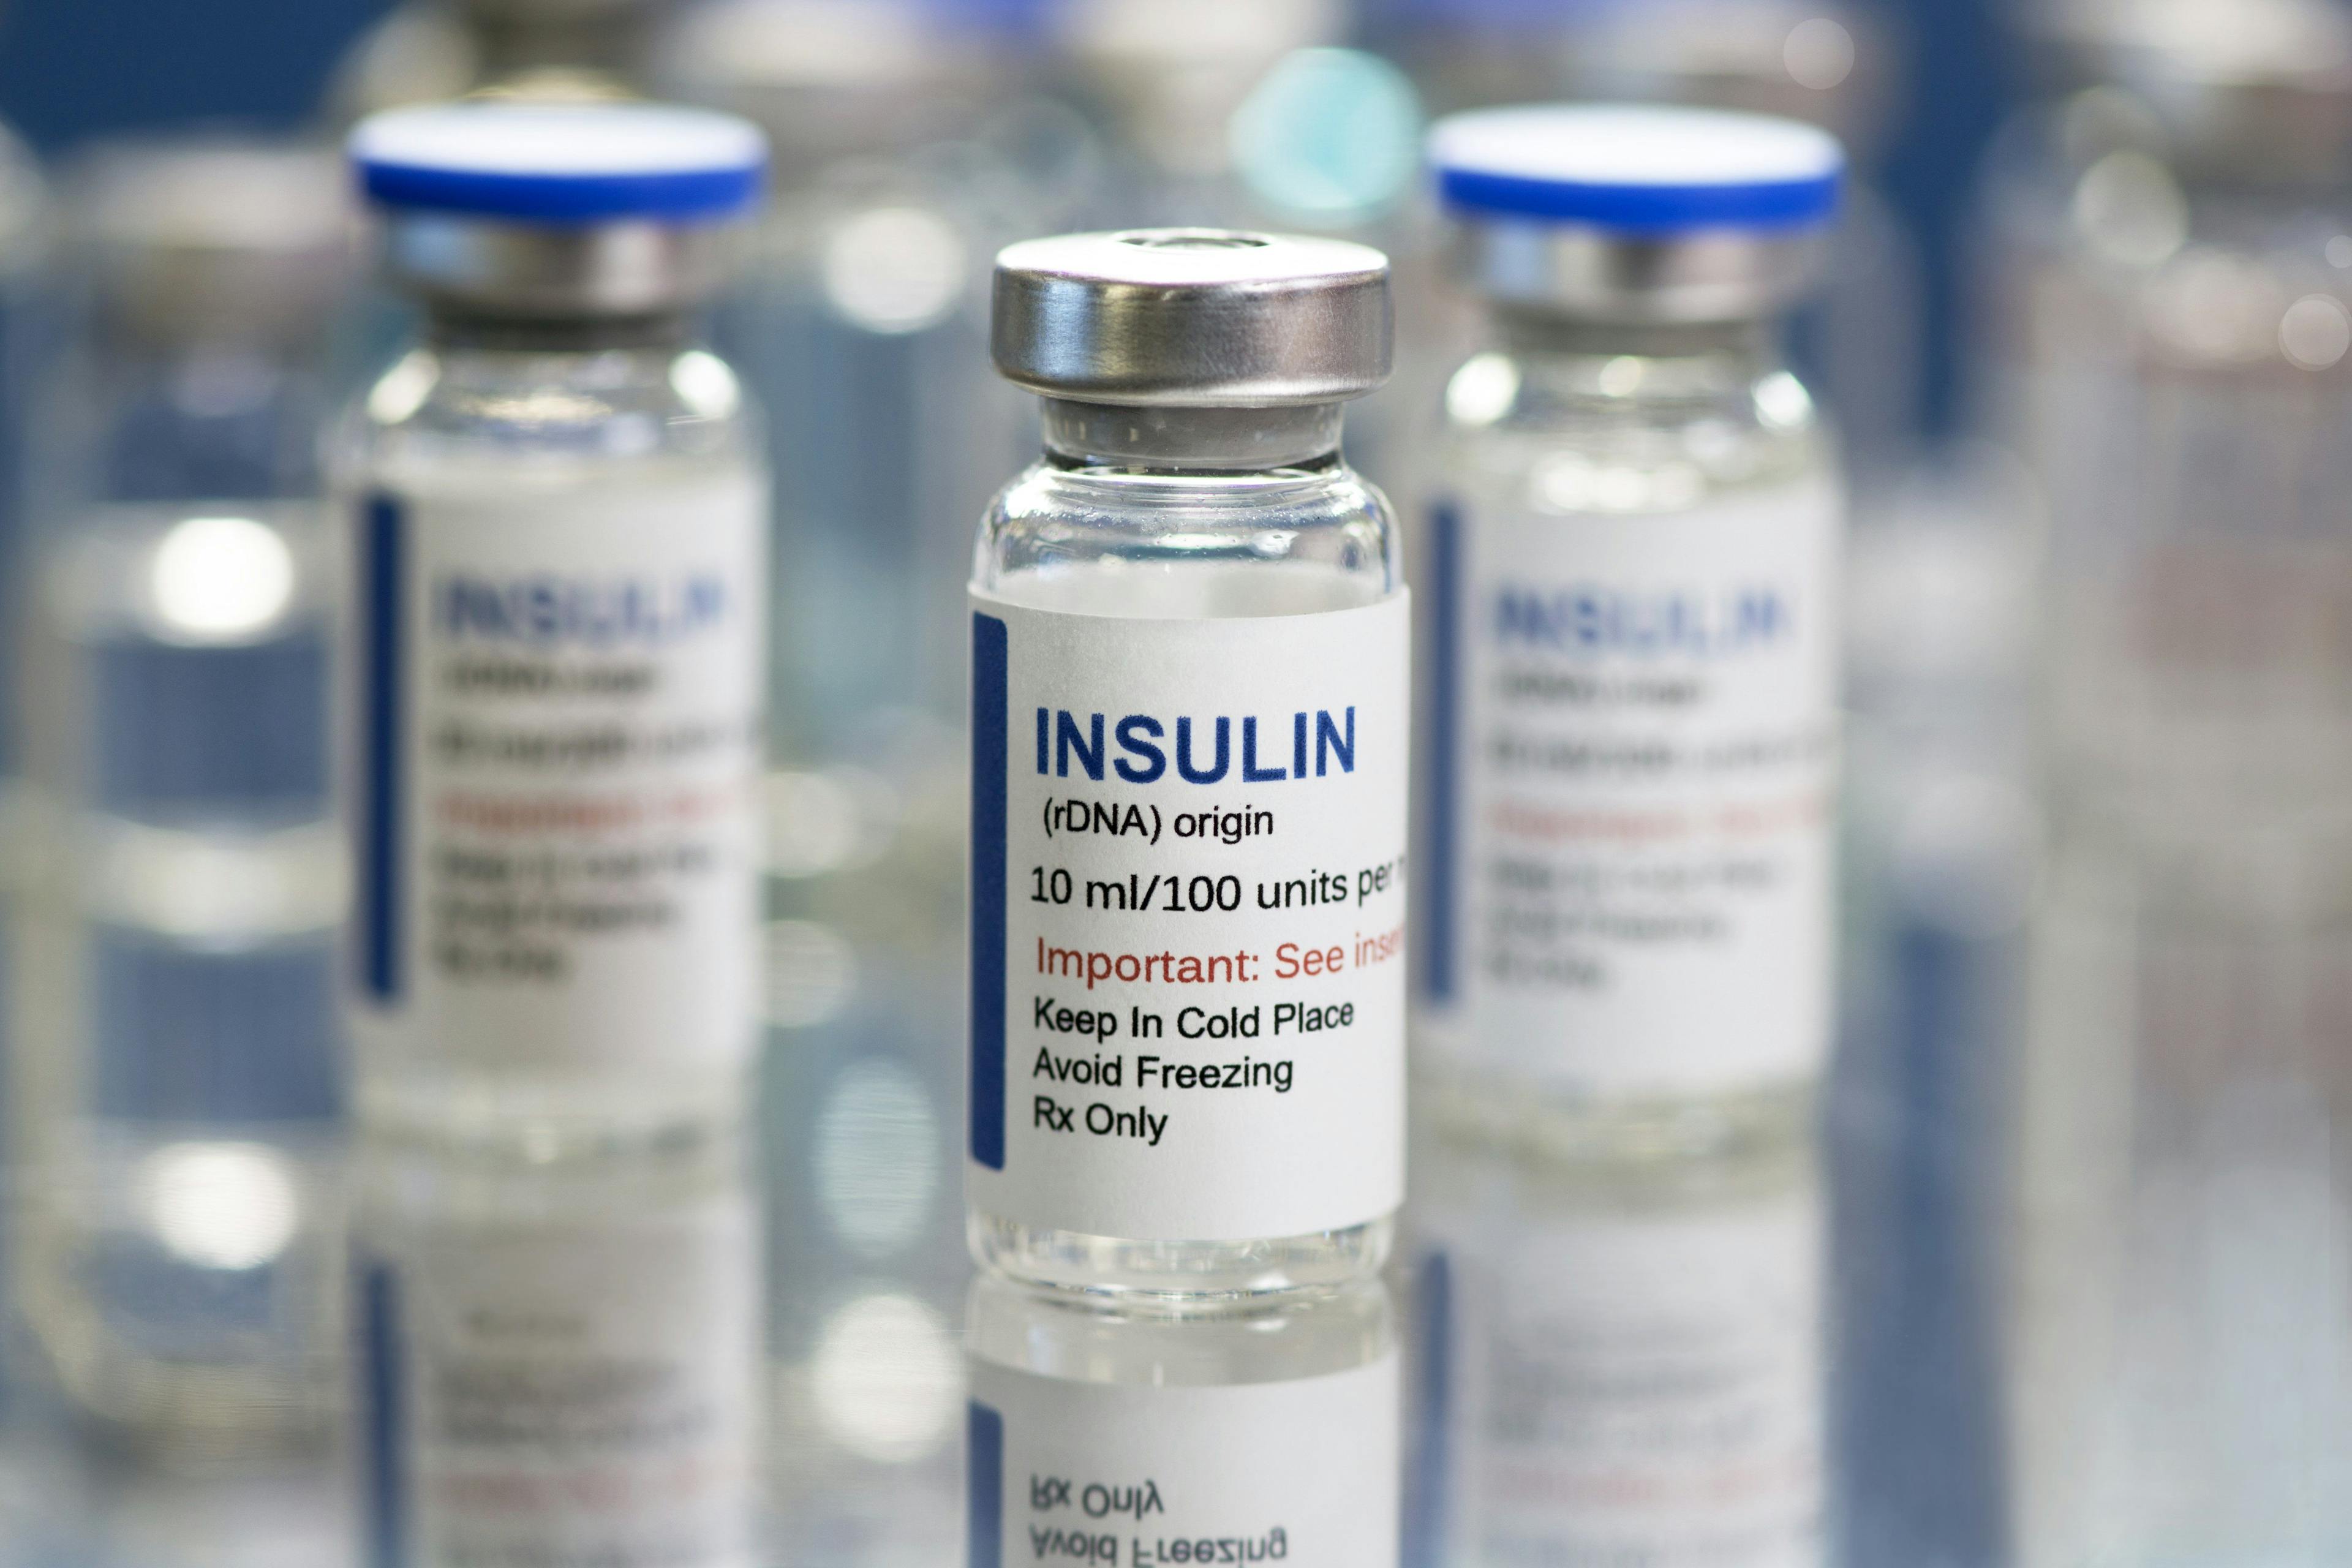 Americans pay much more for insulin than patients in other countries, study finds